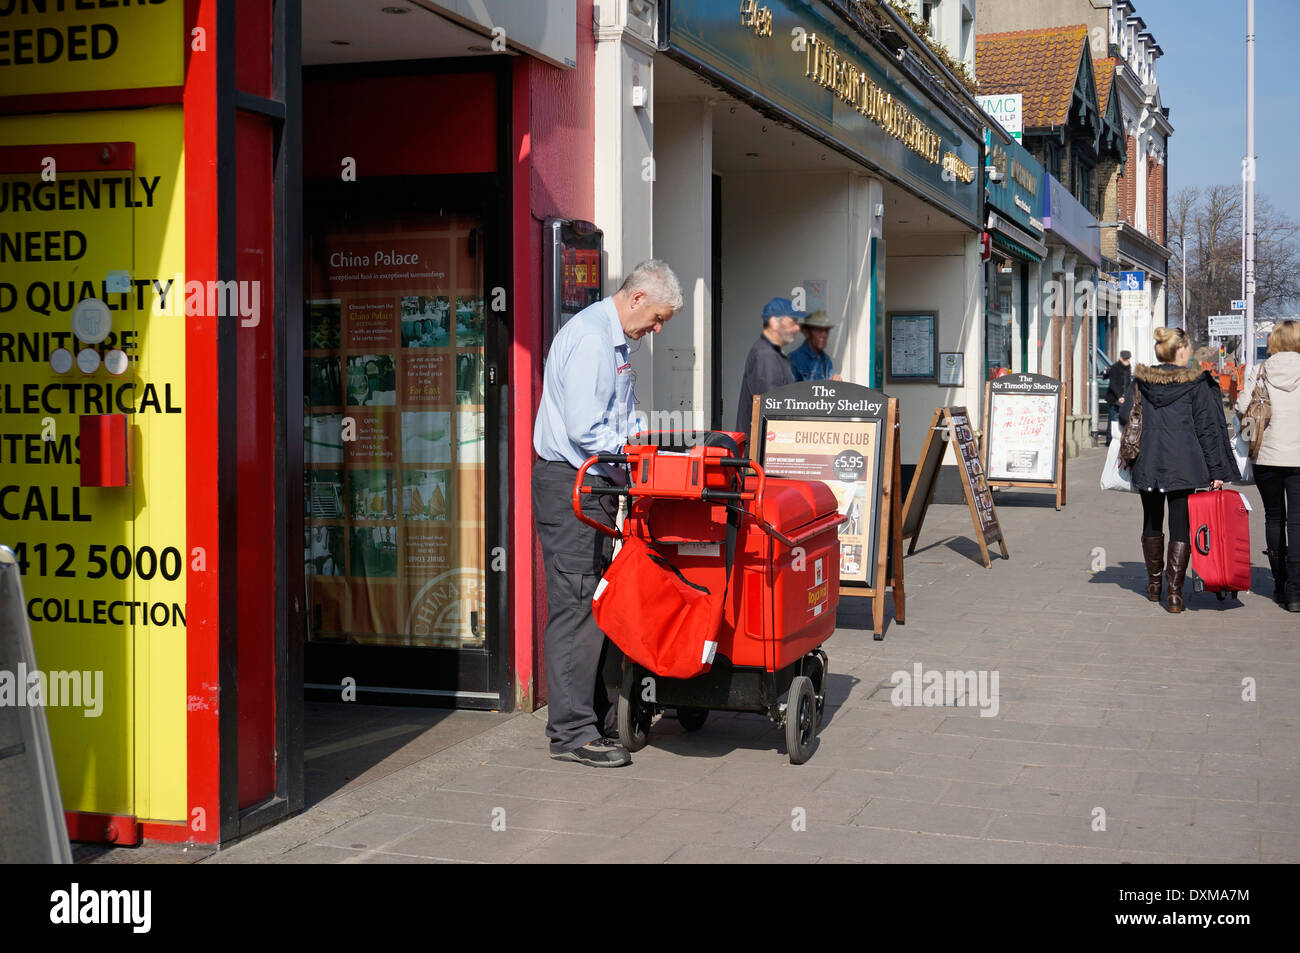 Postman on his round delivering letters & parcels using a 'high capacity' trolley (replacing the old fashioned bicycle) Stock Photo